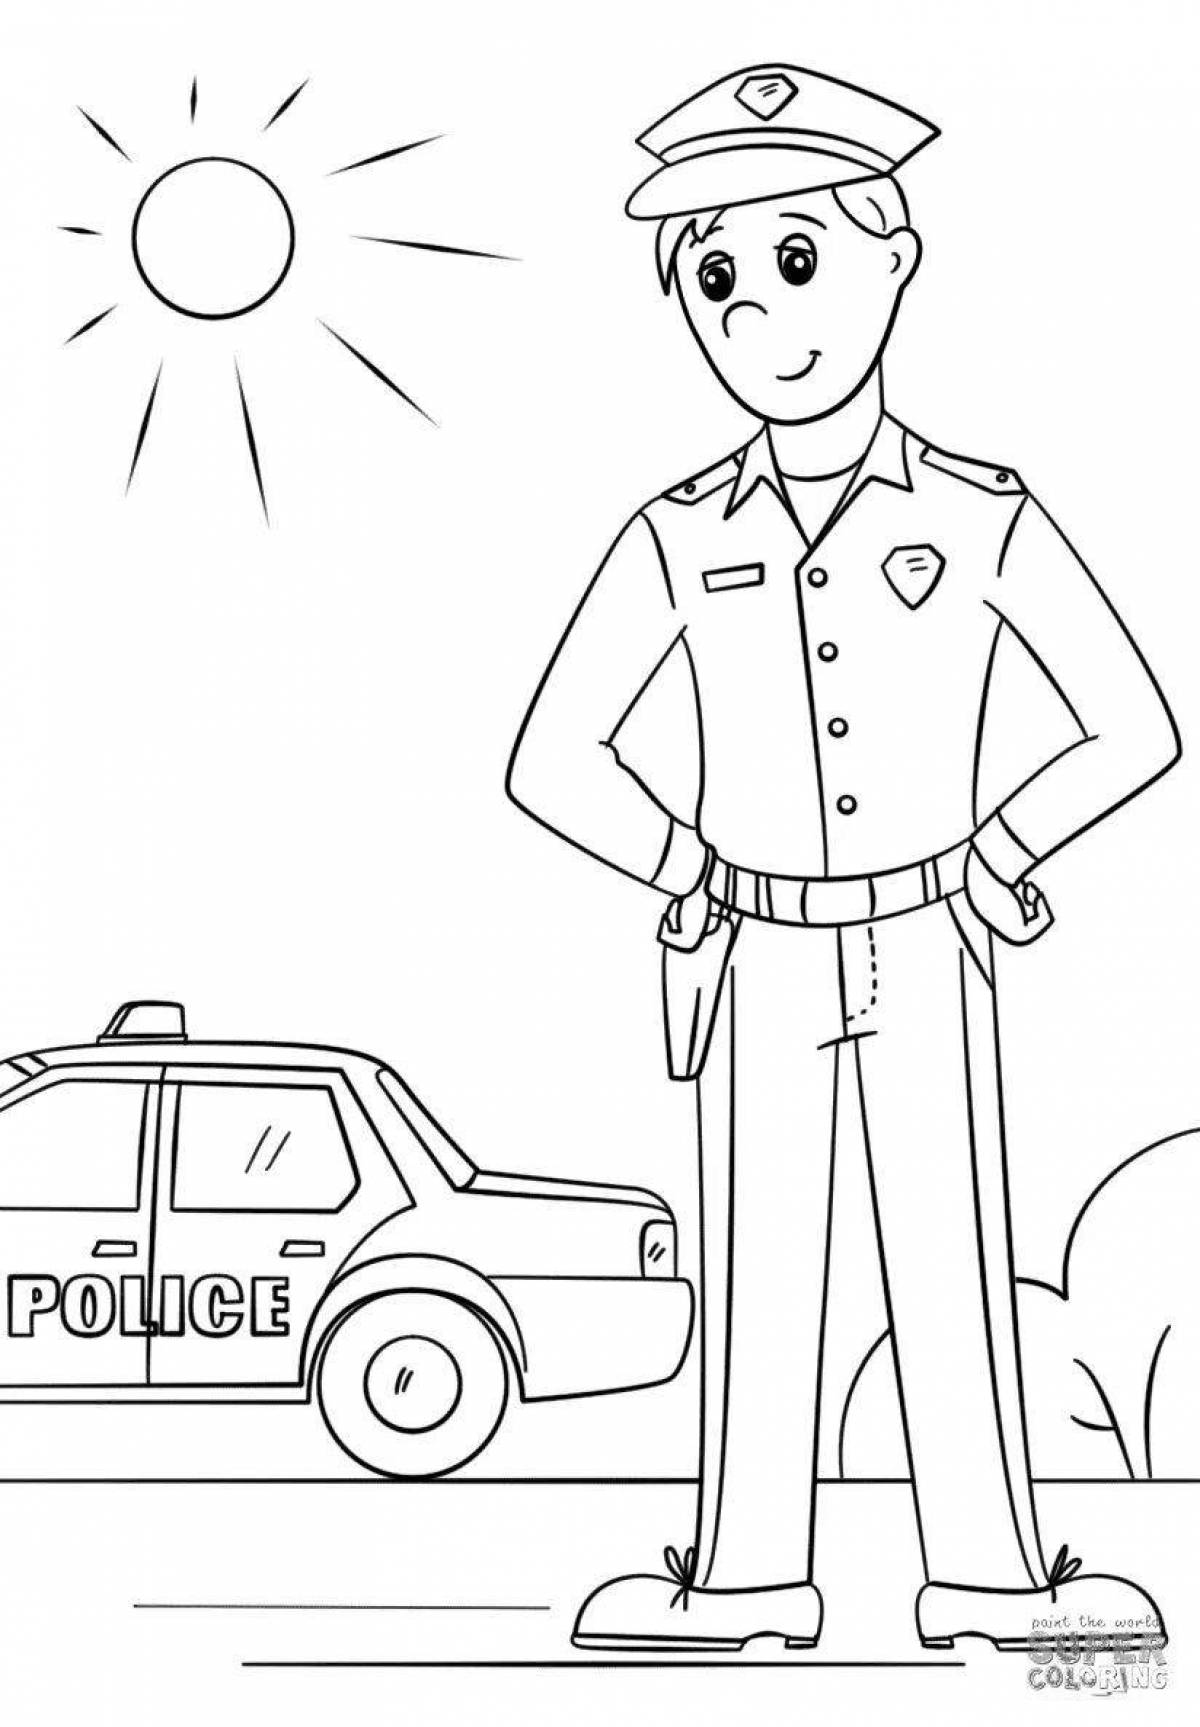 Coloring police profession